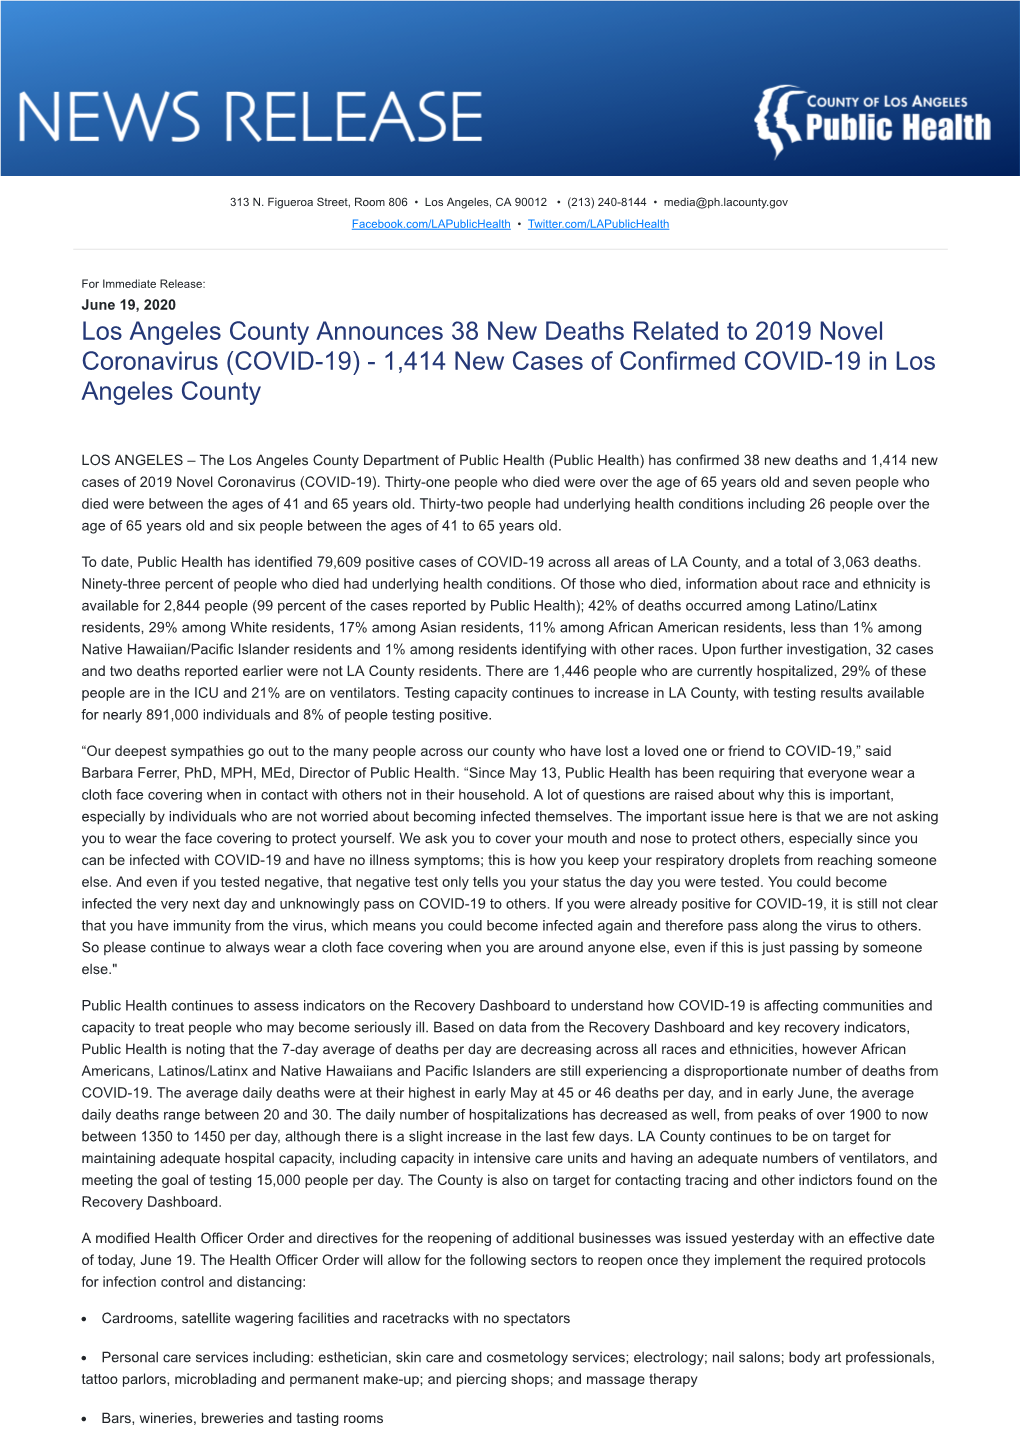 Los Angeles County Announces 38 New Deaths Related to 2019 Novel Coronavirus (COVID-19) - 1,414 New Cases of Confirmed COVID-19 in Los Angeles County